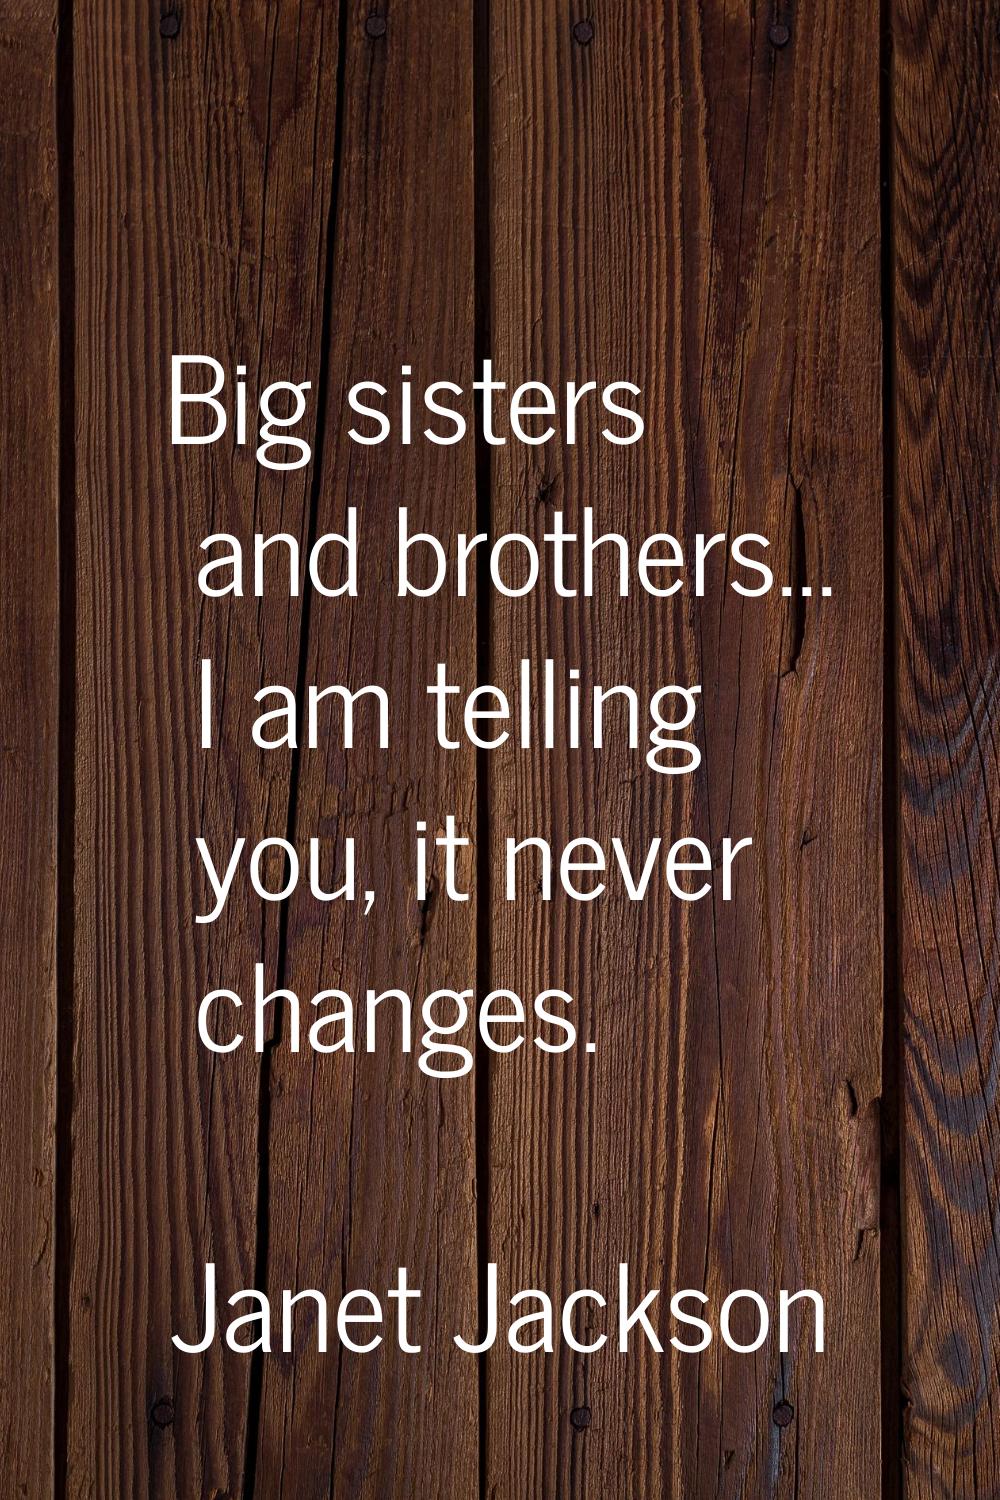 Big sisters and brothers... I am telling you, it never changes.